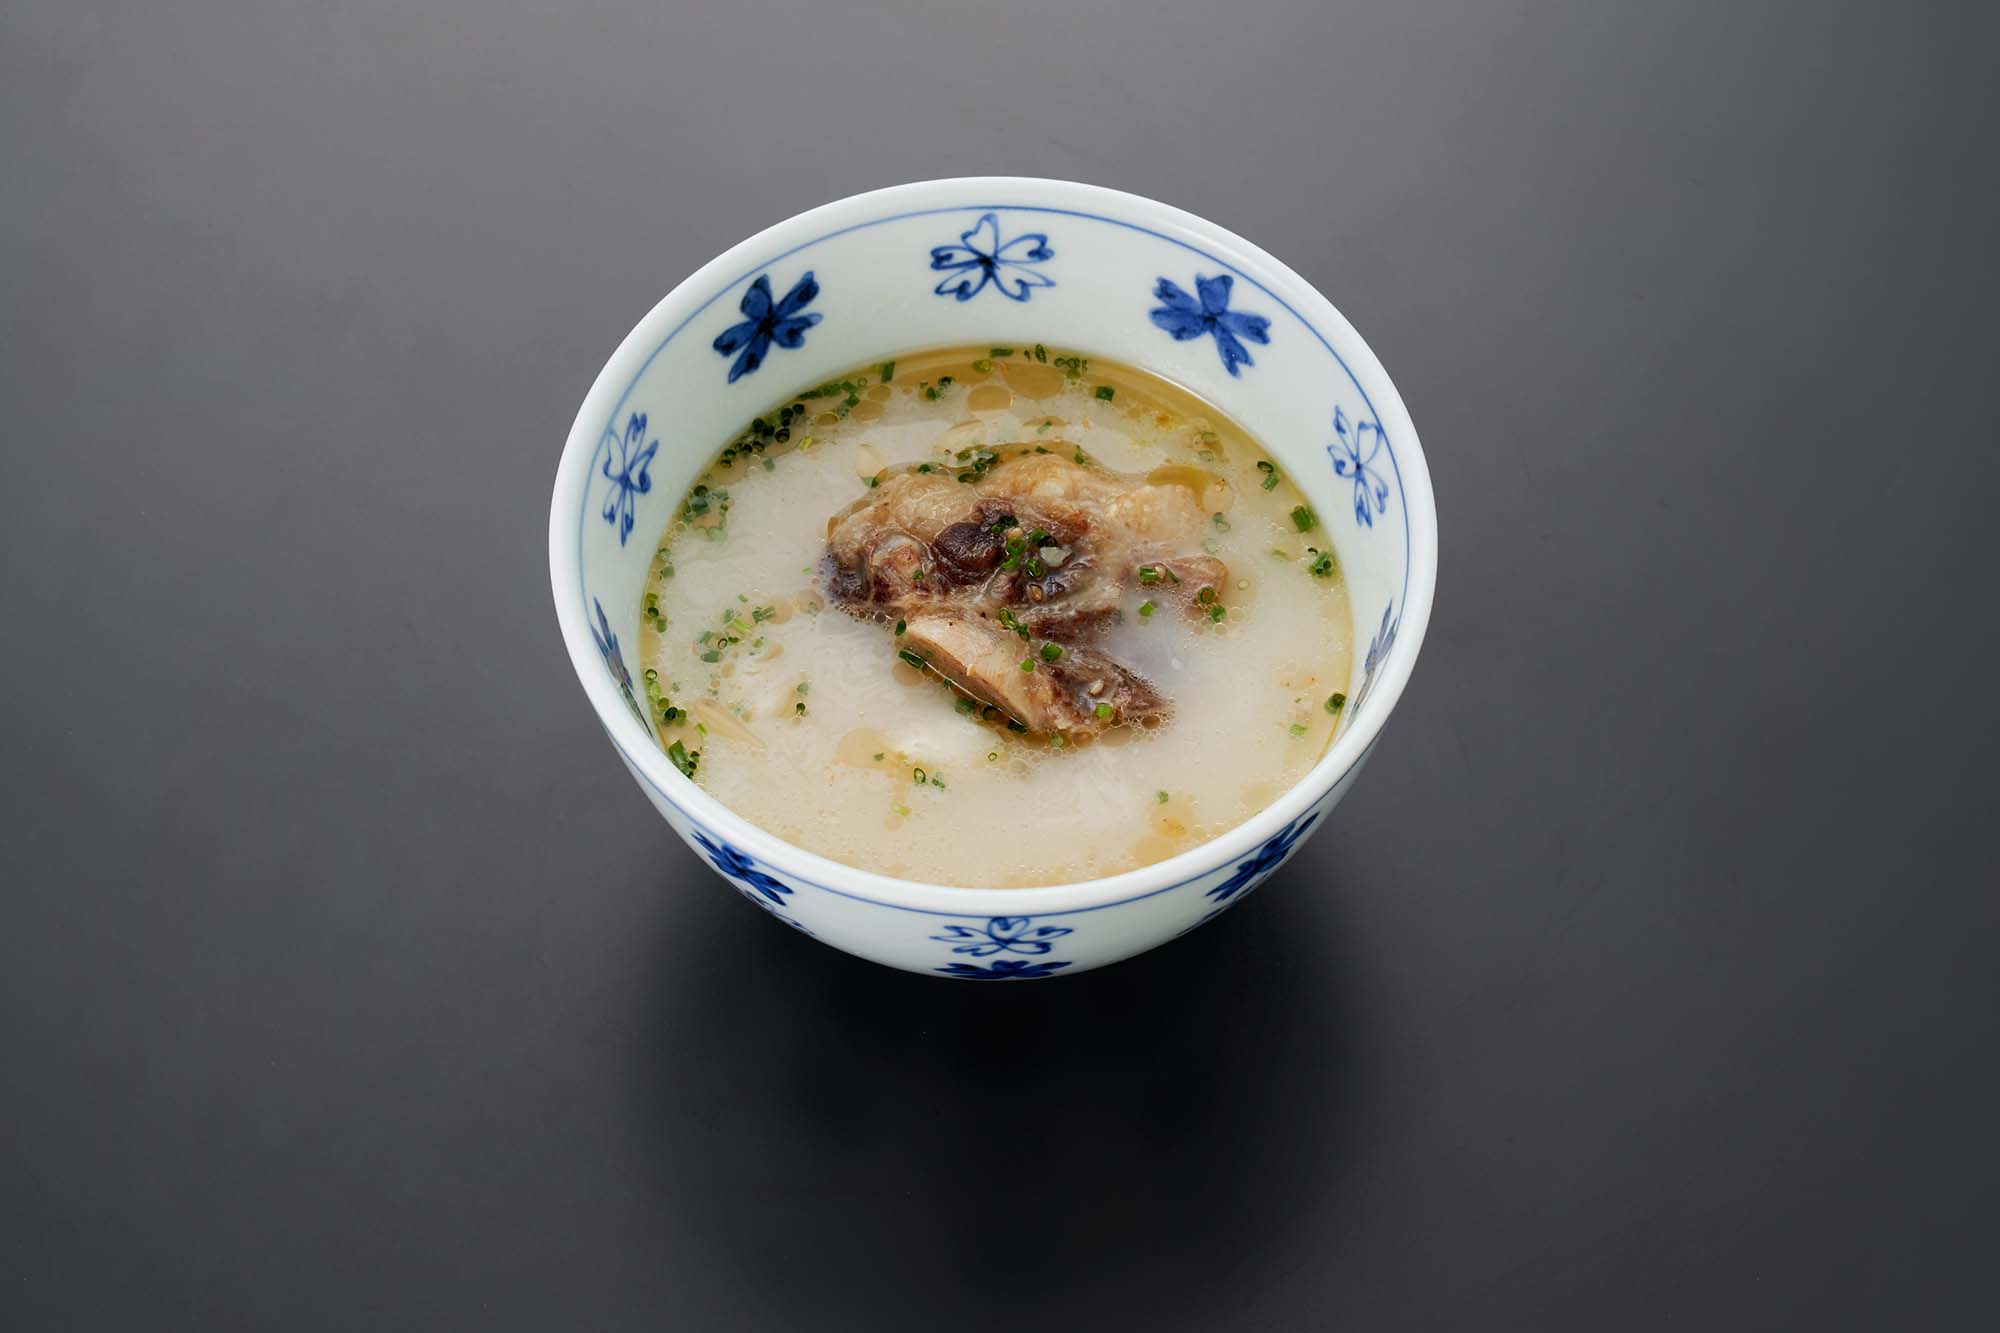 Gom-tang soup